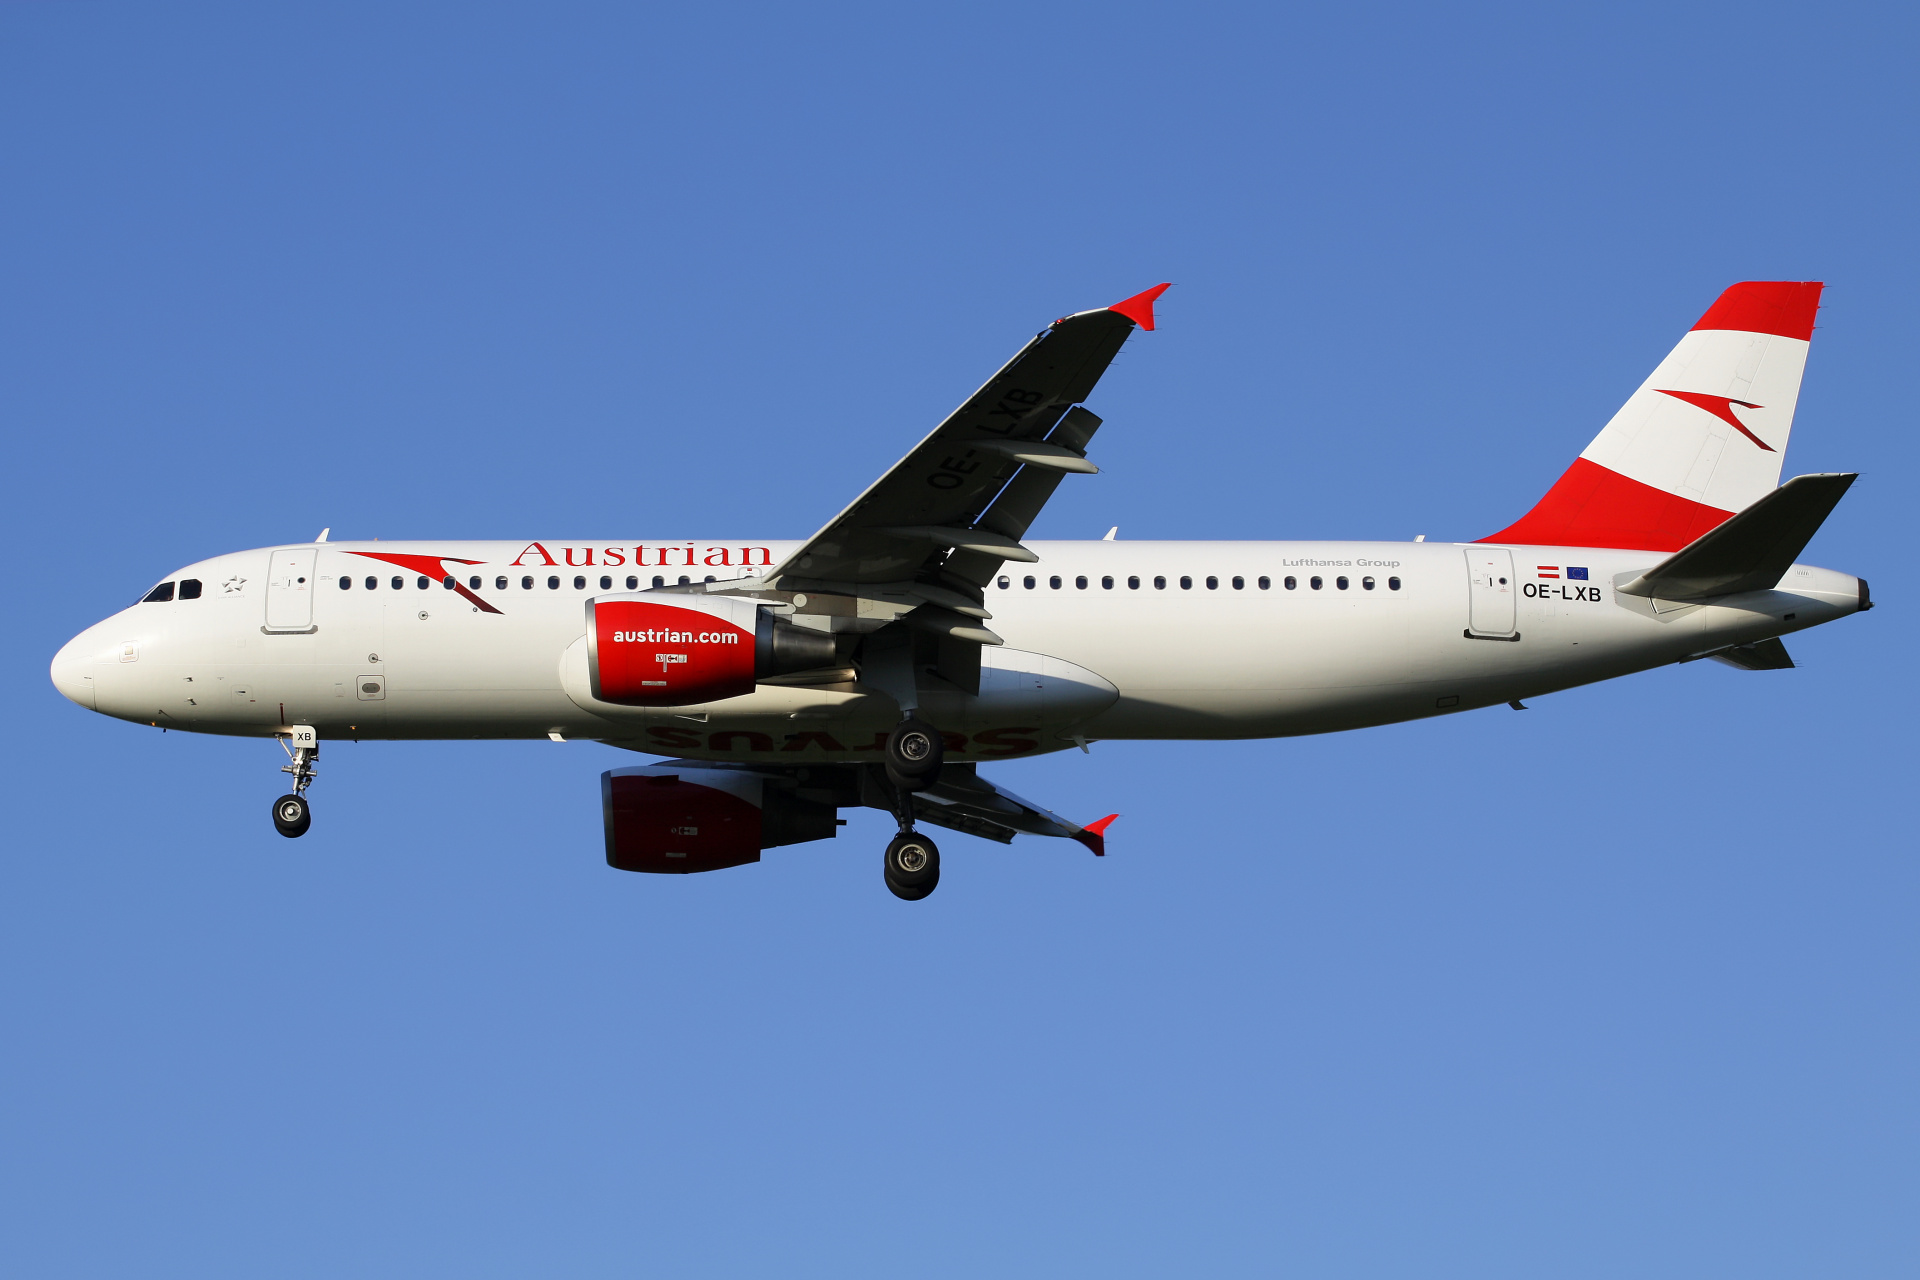 OE-LXB, Austrian Airlines (Aircraft » EPWA Spotting » Airbus A320-200)